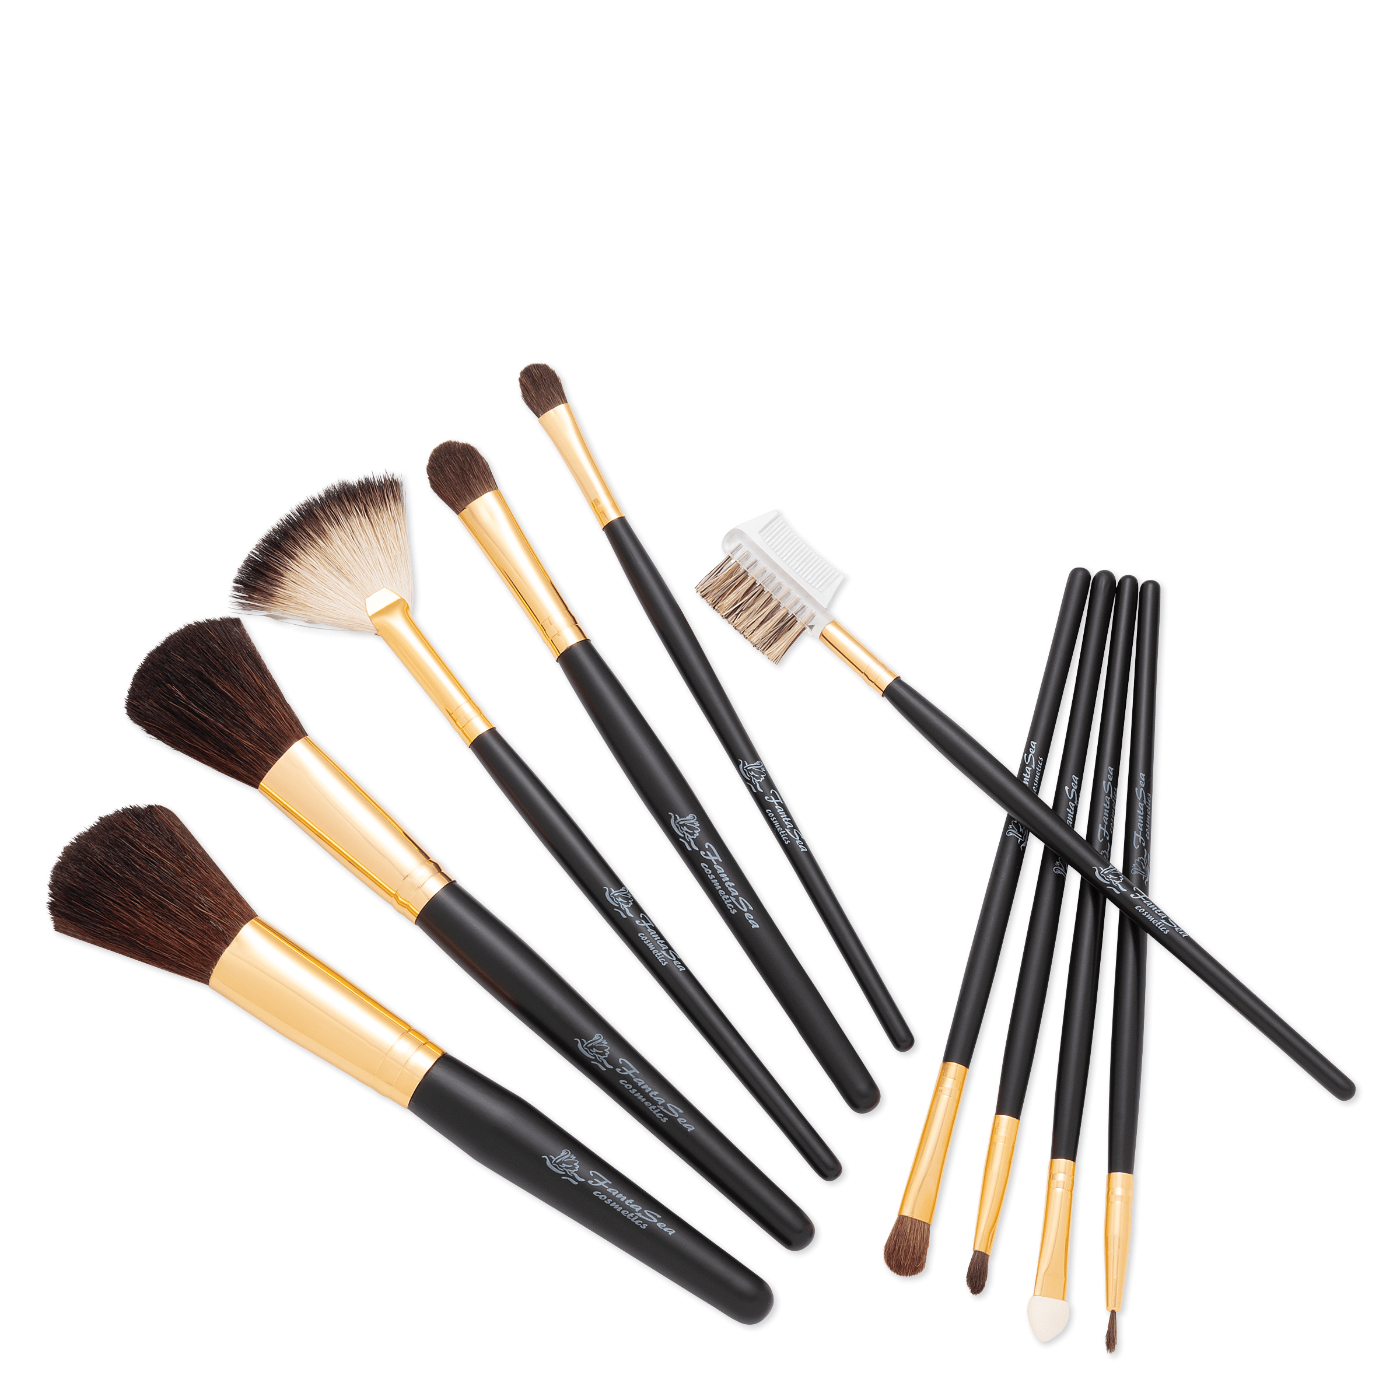 Makeup Brush Set in Roll-up Case - 10 pc.